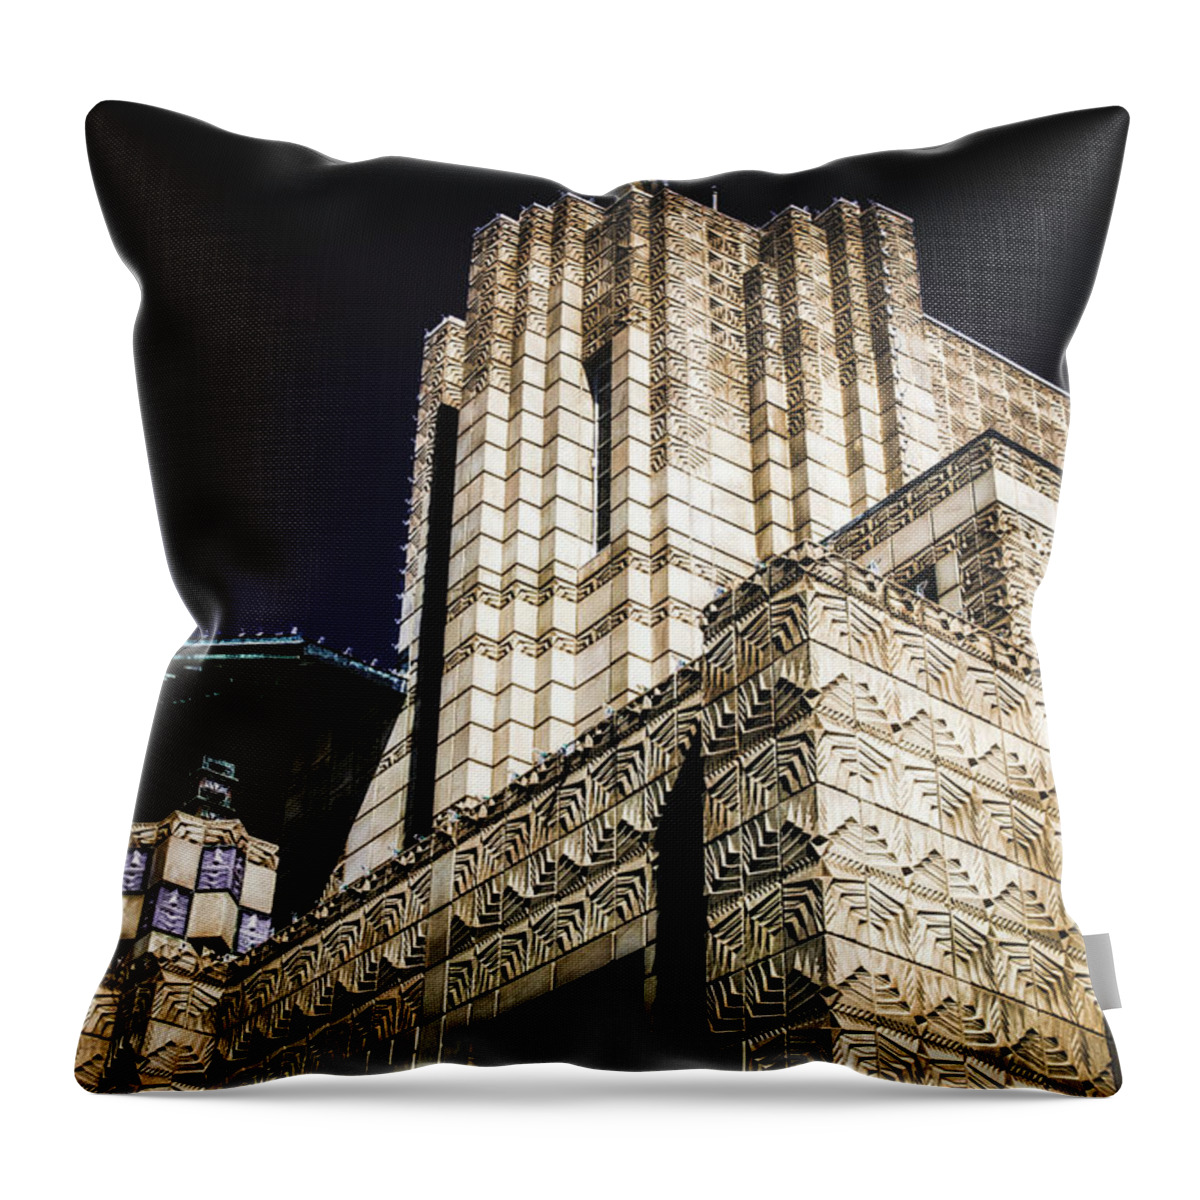 Phoenix Throw Pillow featuring the photograph Biltmore Beauty by Mark David Gerson